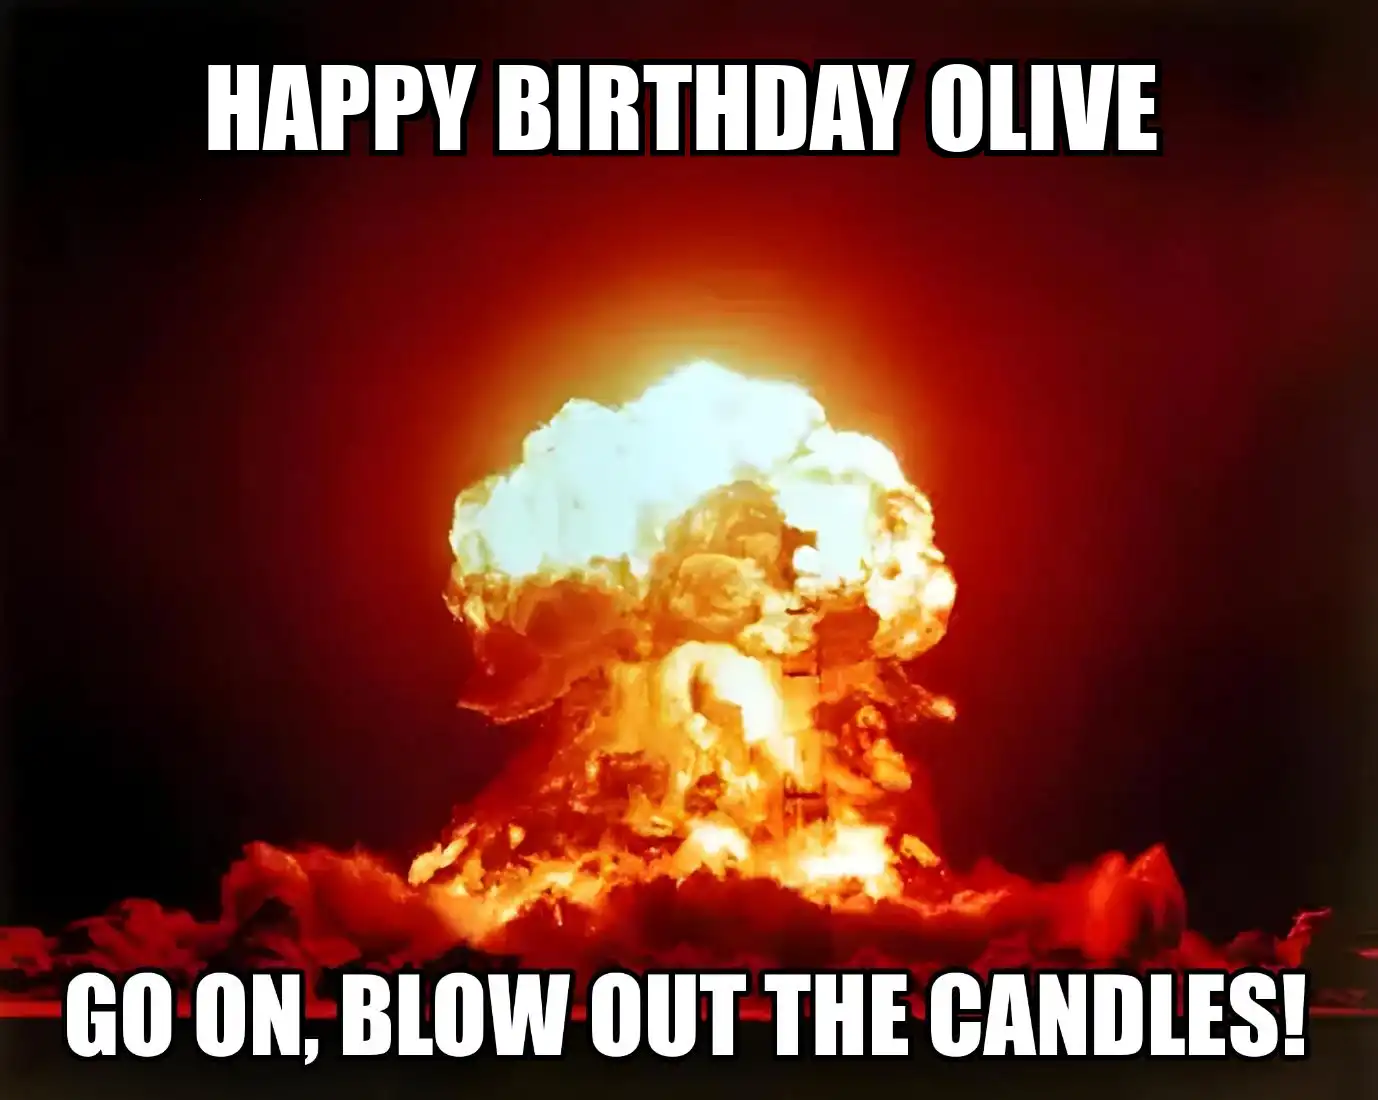 Happy Birthday Olive Go On Blow Out The Candles Meme